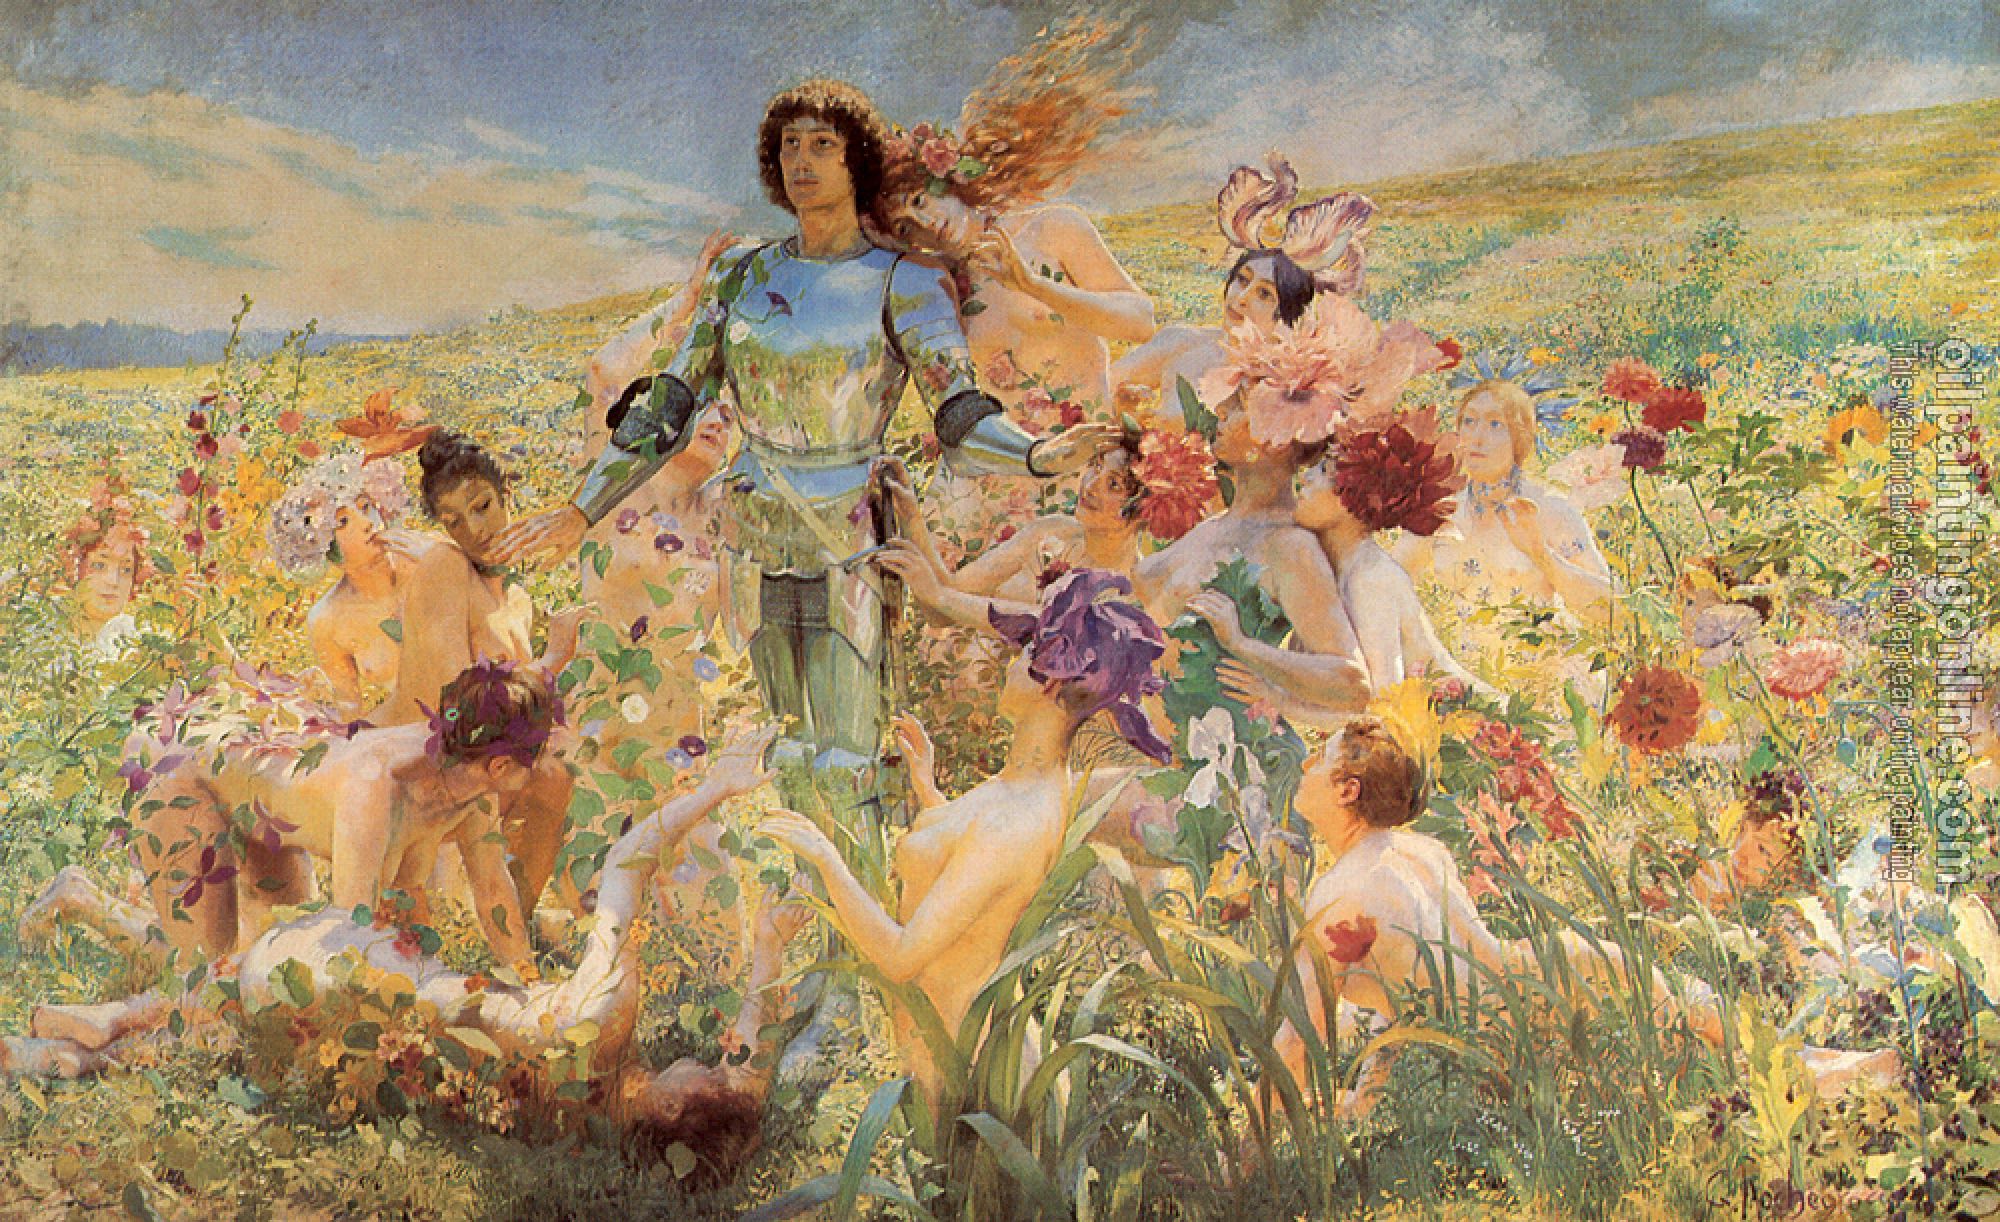 Georges Antoine Rochegrosse - The Knight of the Flowers